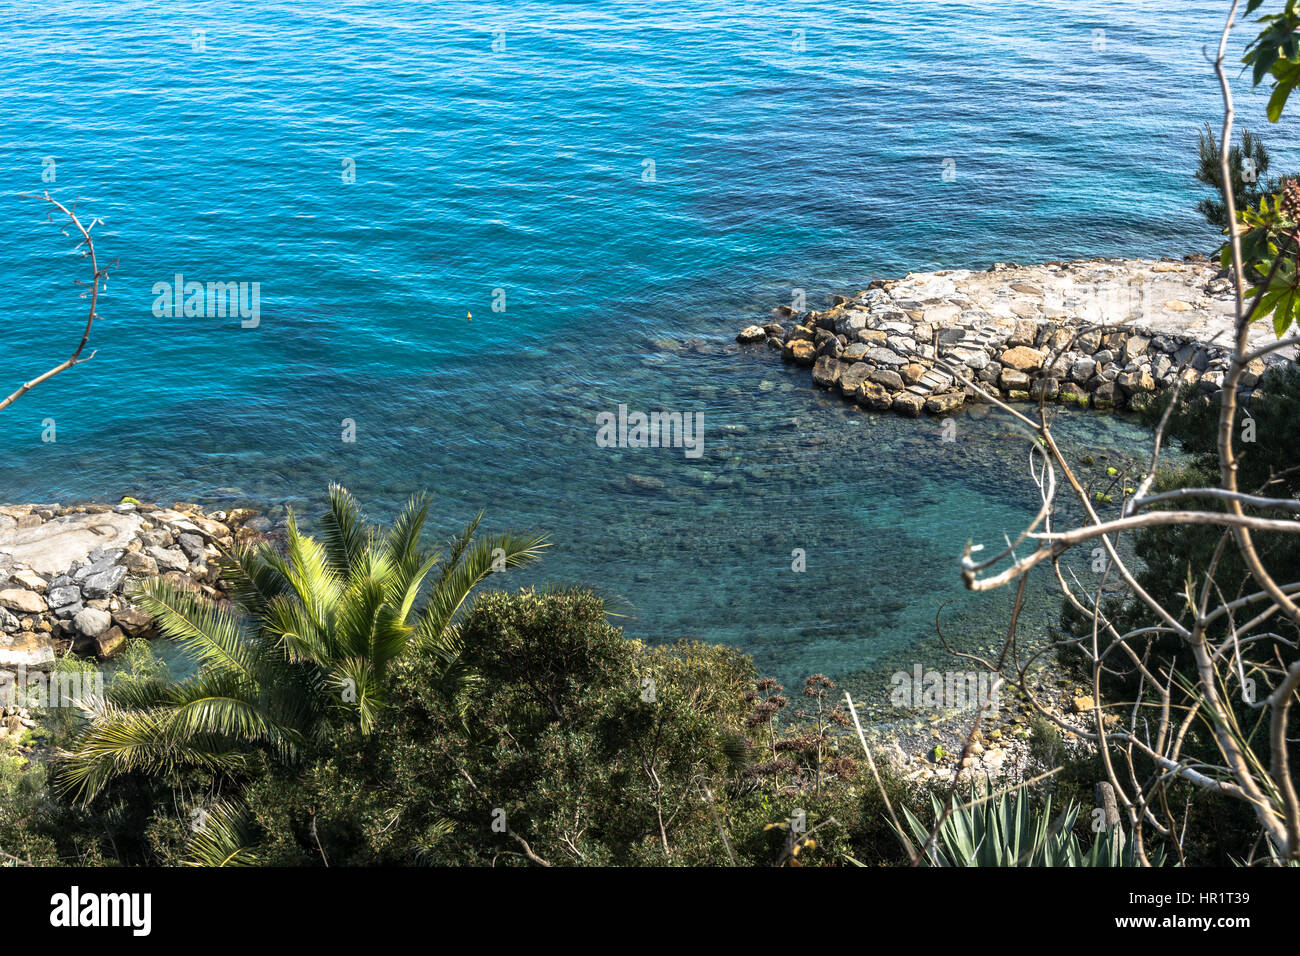 View of the coast of Sanremo with blue sea and succulent plants, Italy Stock Photo